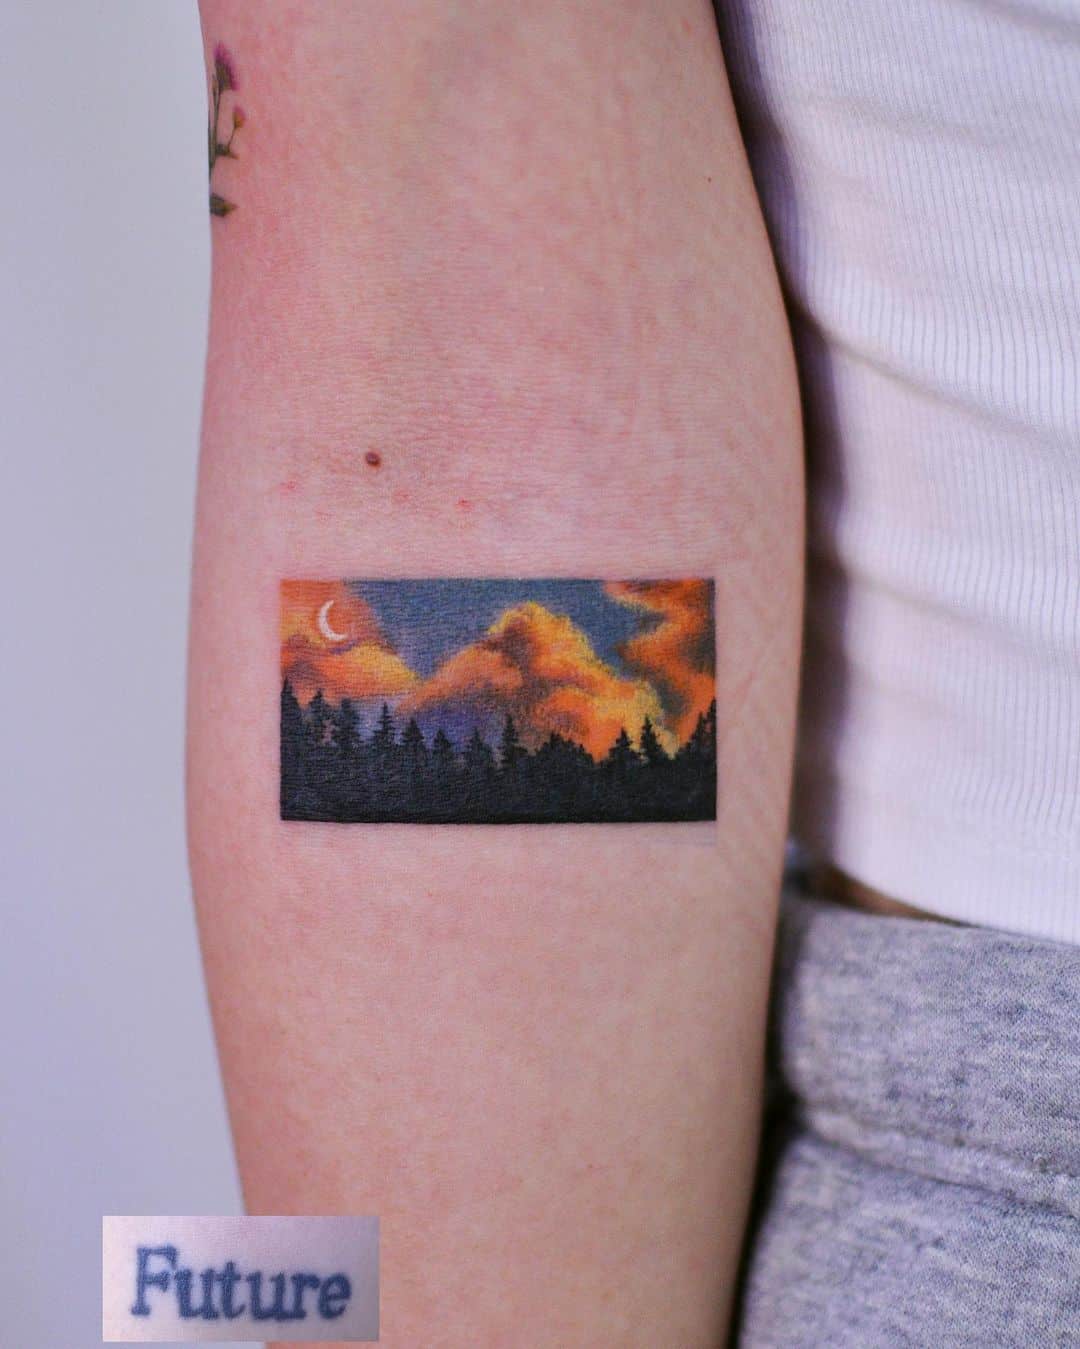 Sunset tattoo by thistle.tattoo